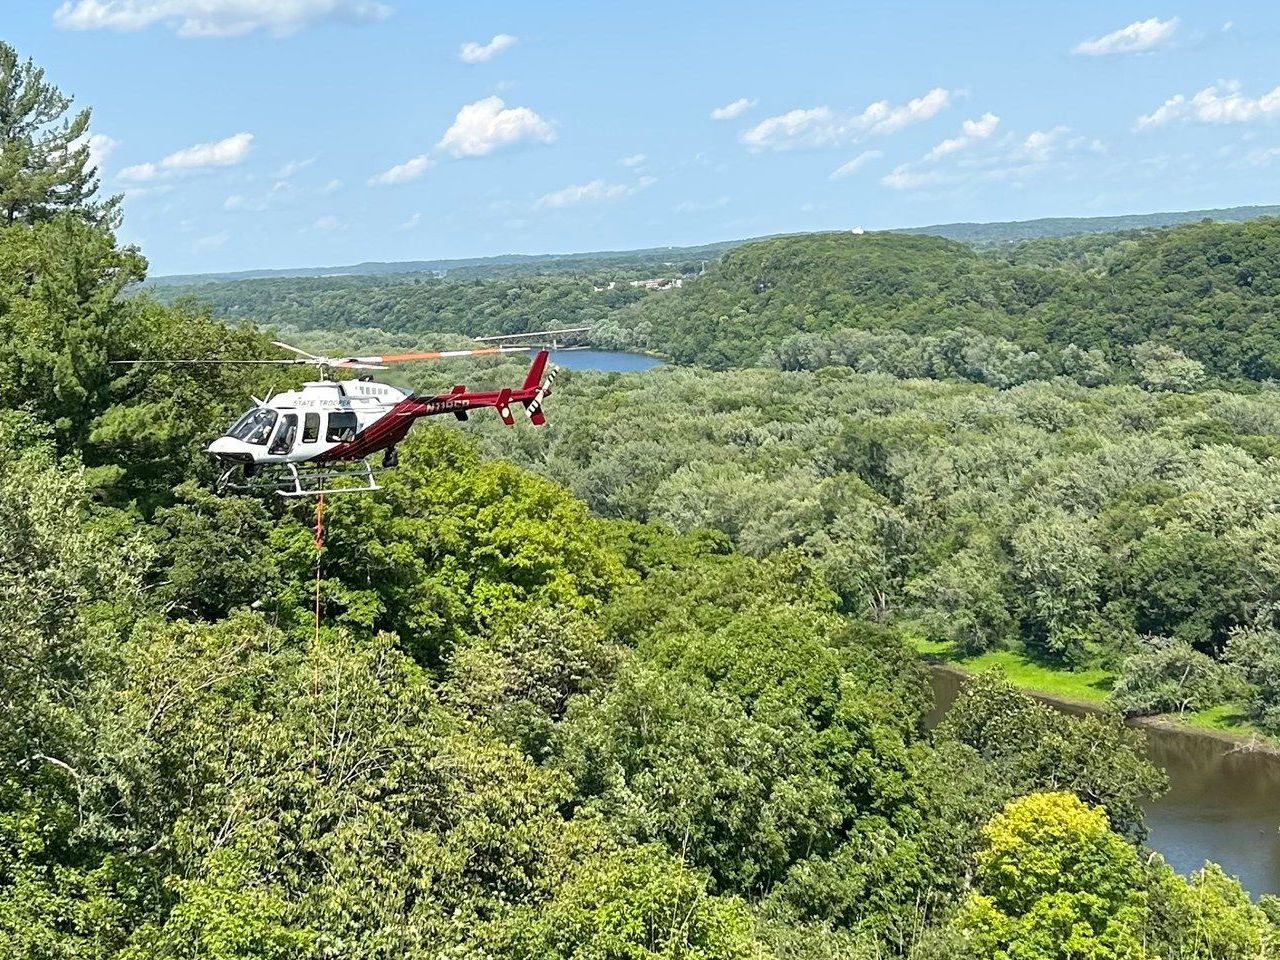 Helicopters help rescue man after fall down St. Croix River bluff